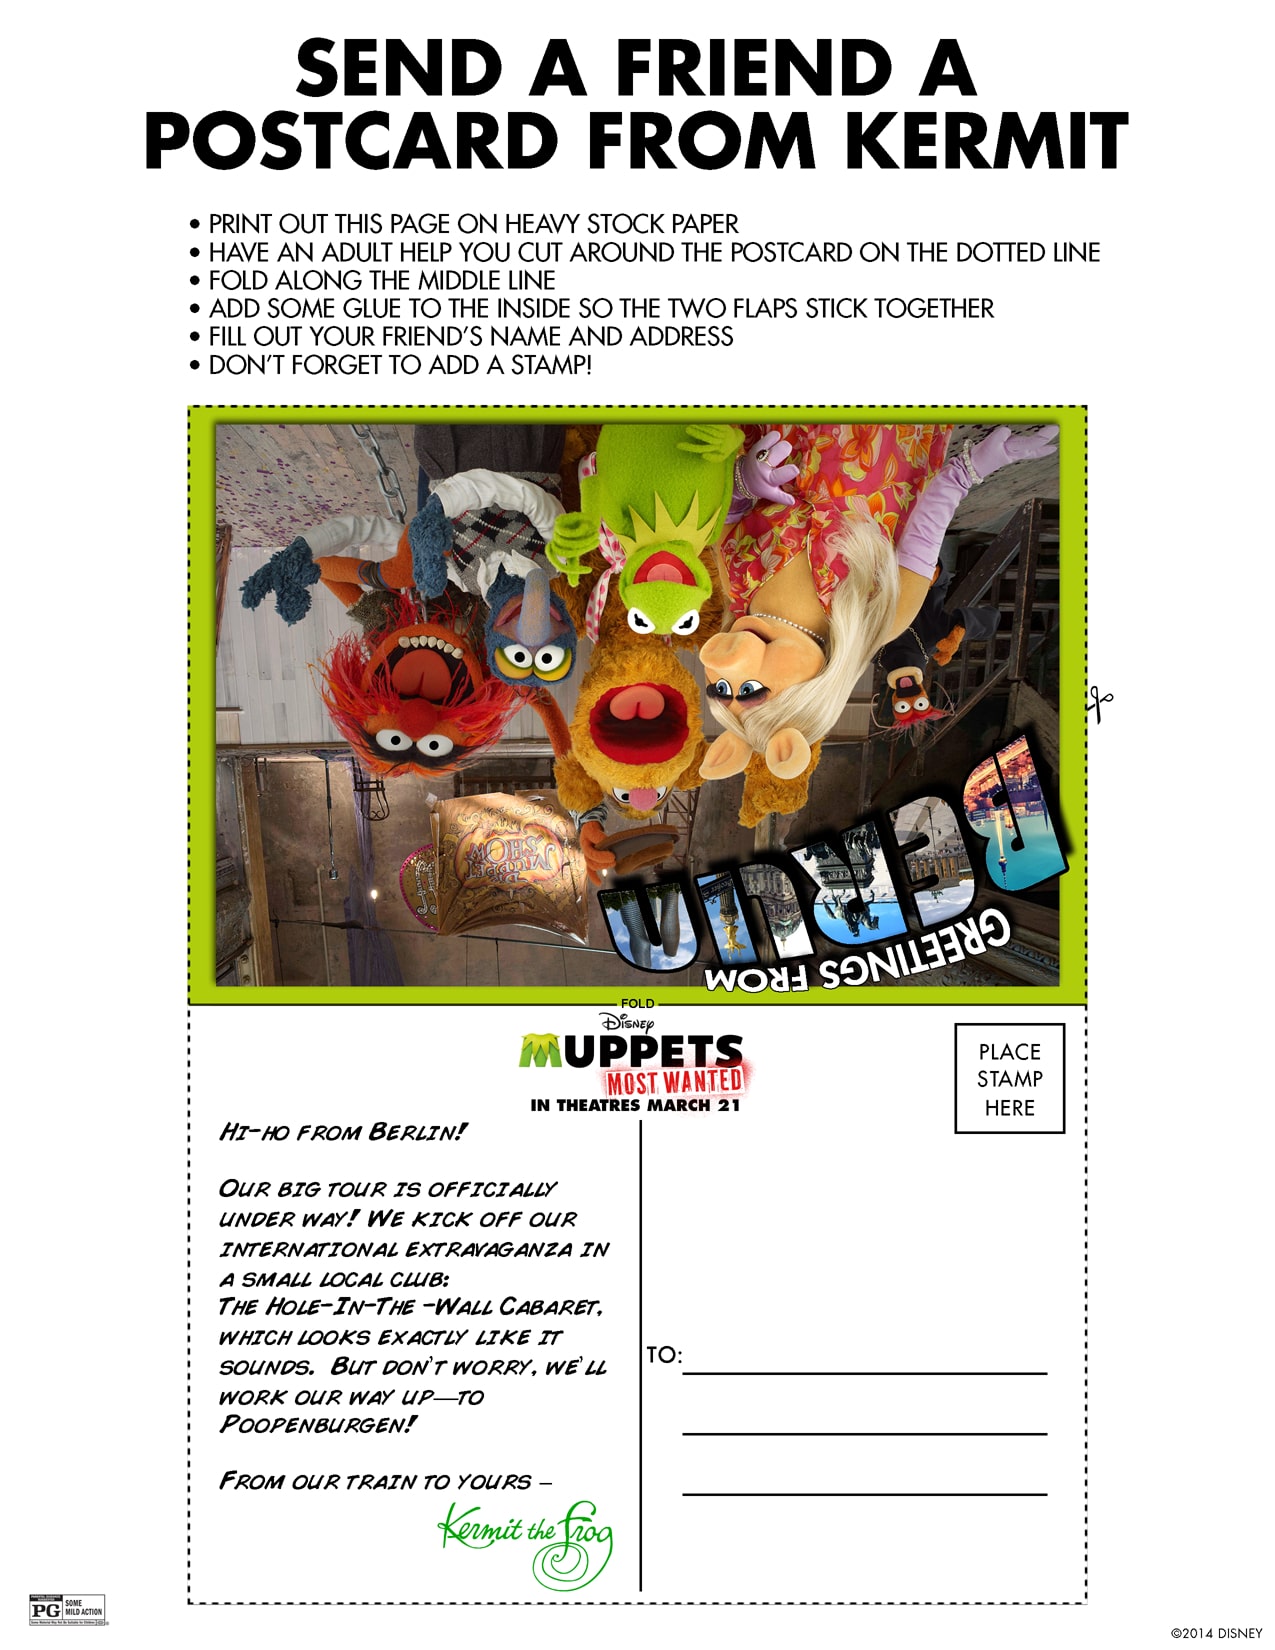 Disney's Muppets Most Wanted Send a Friend a Postcard from Kermit